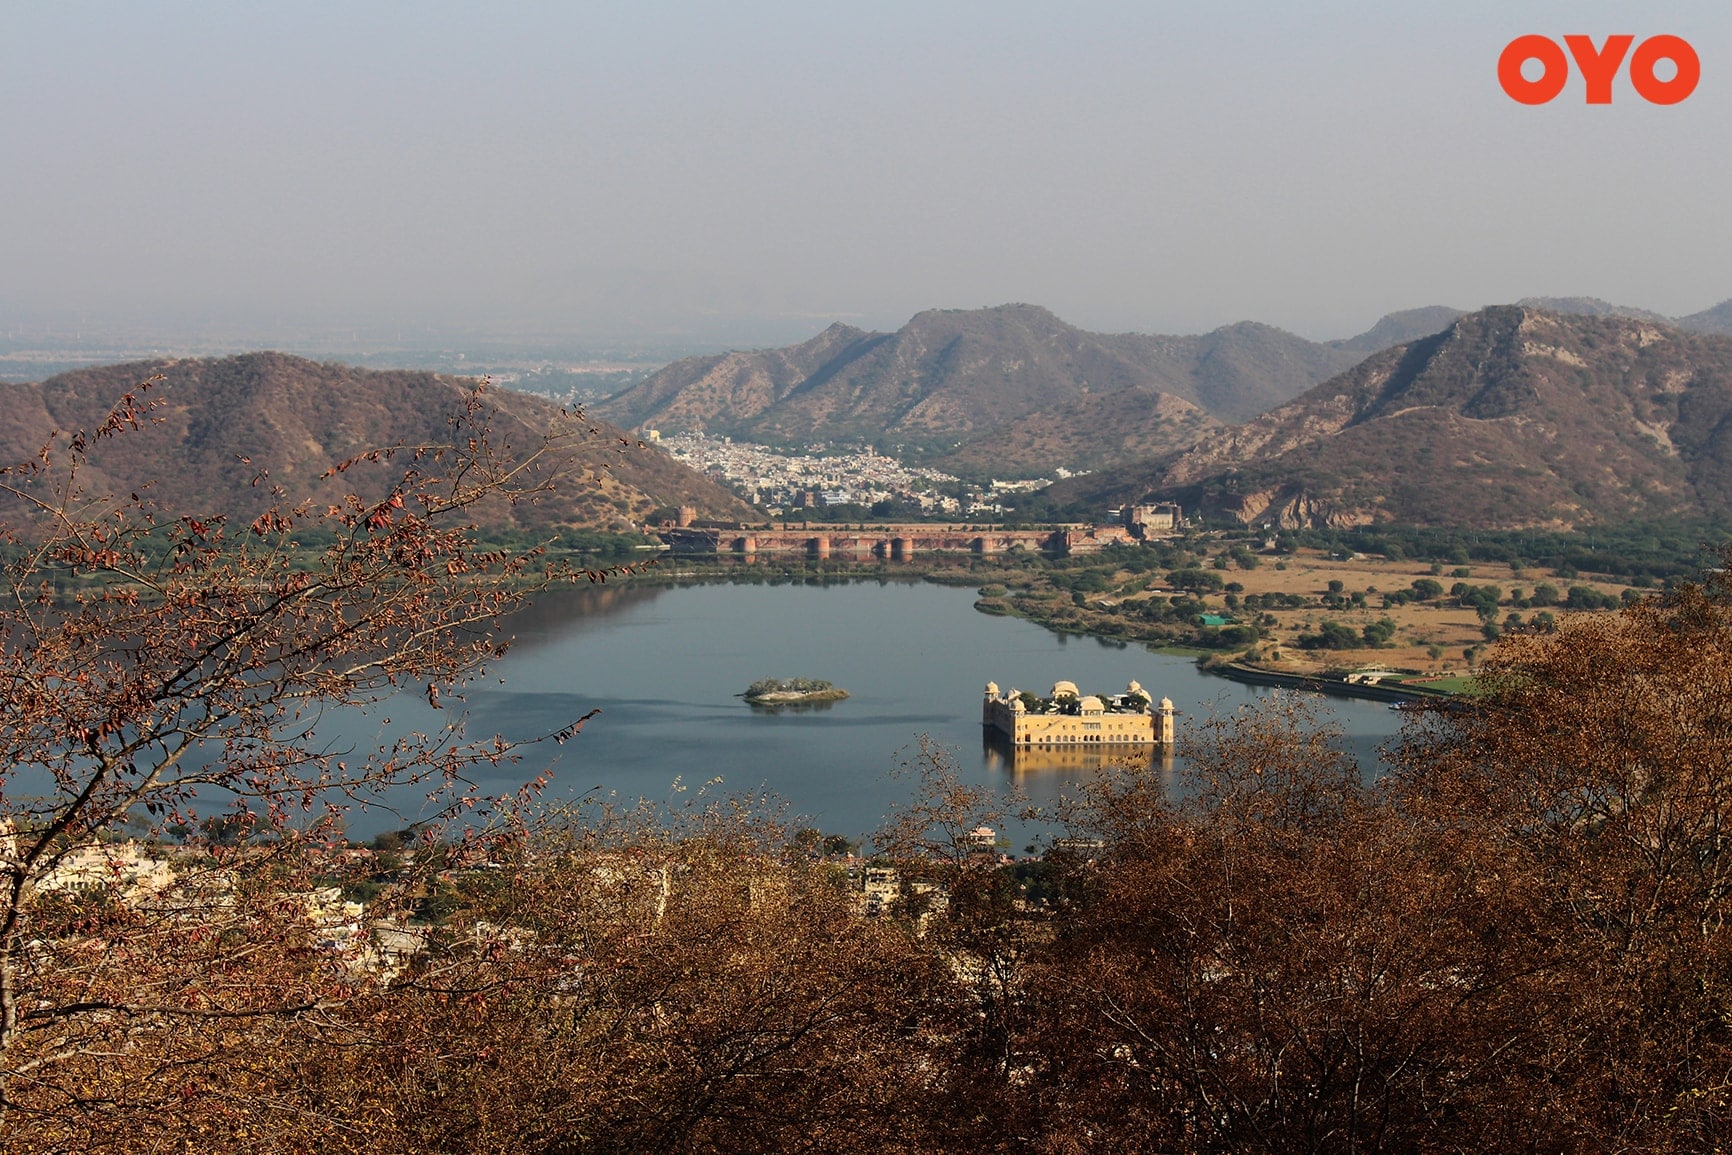 A view of Jal Mahal enroute Nahargarh Fort